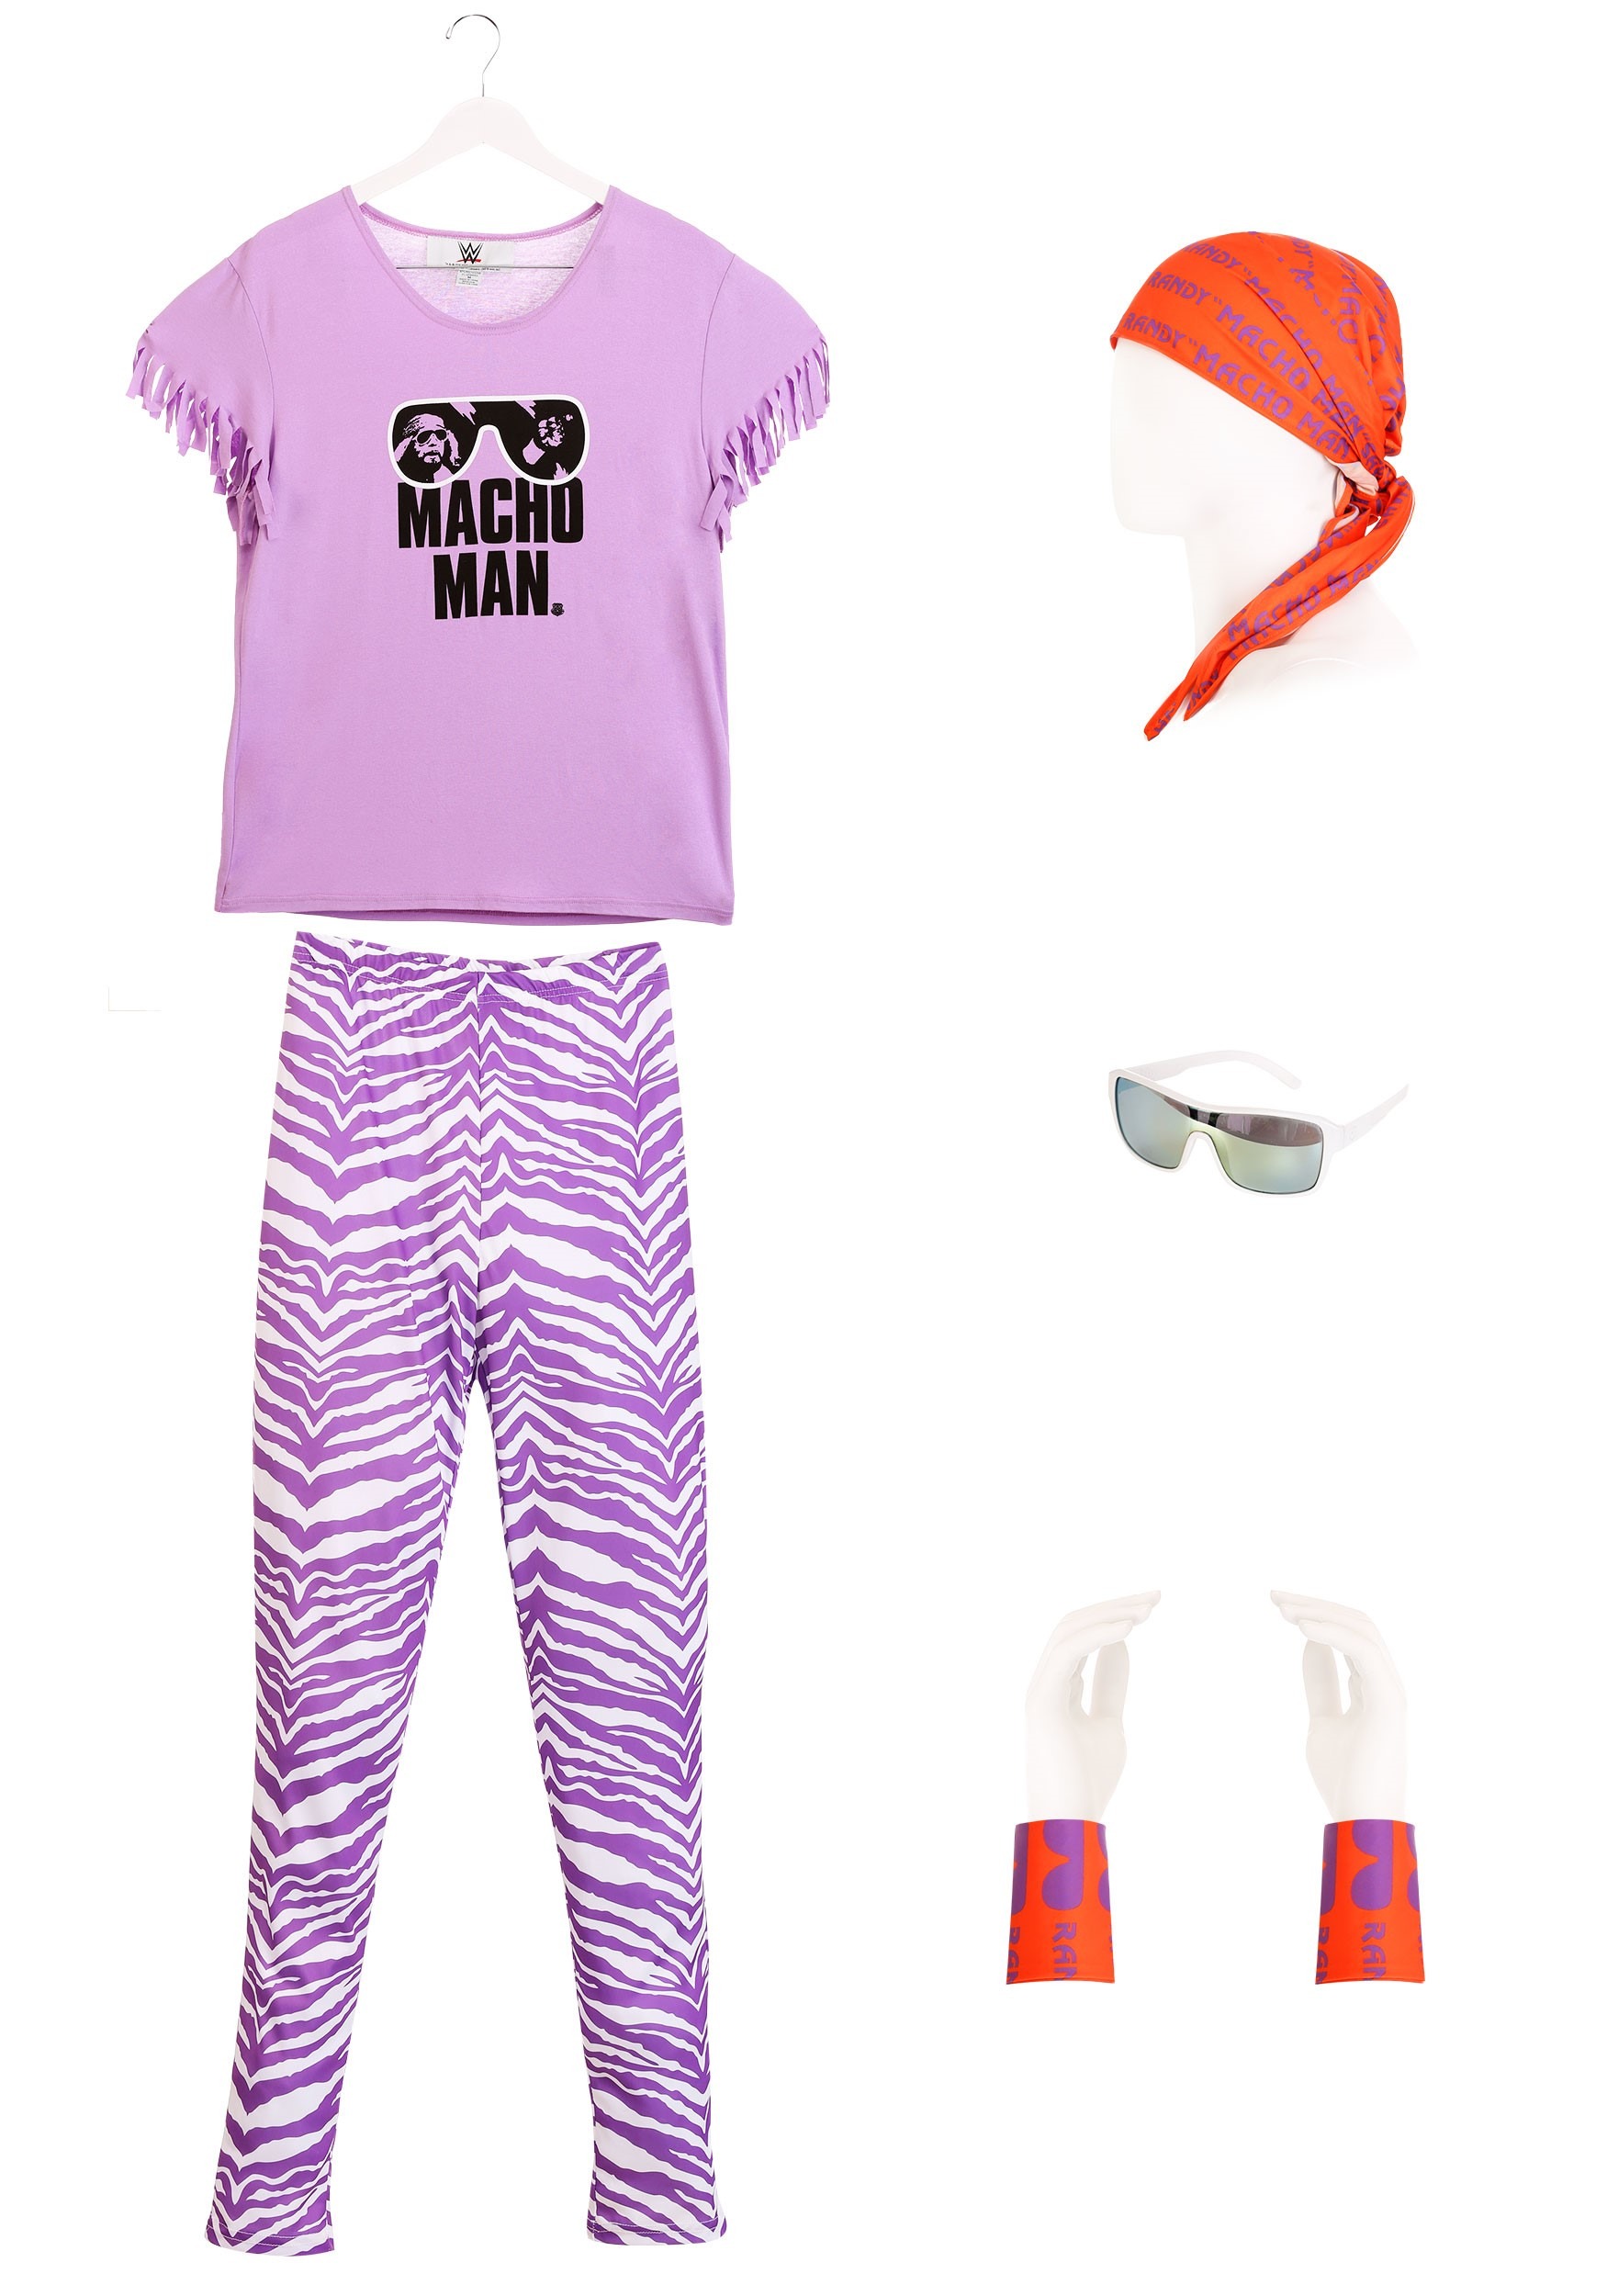 WWE Macho Man Madness Costume for Adults